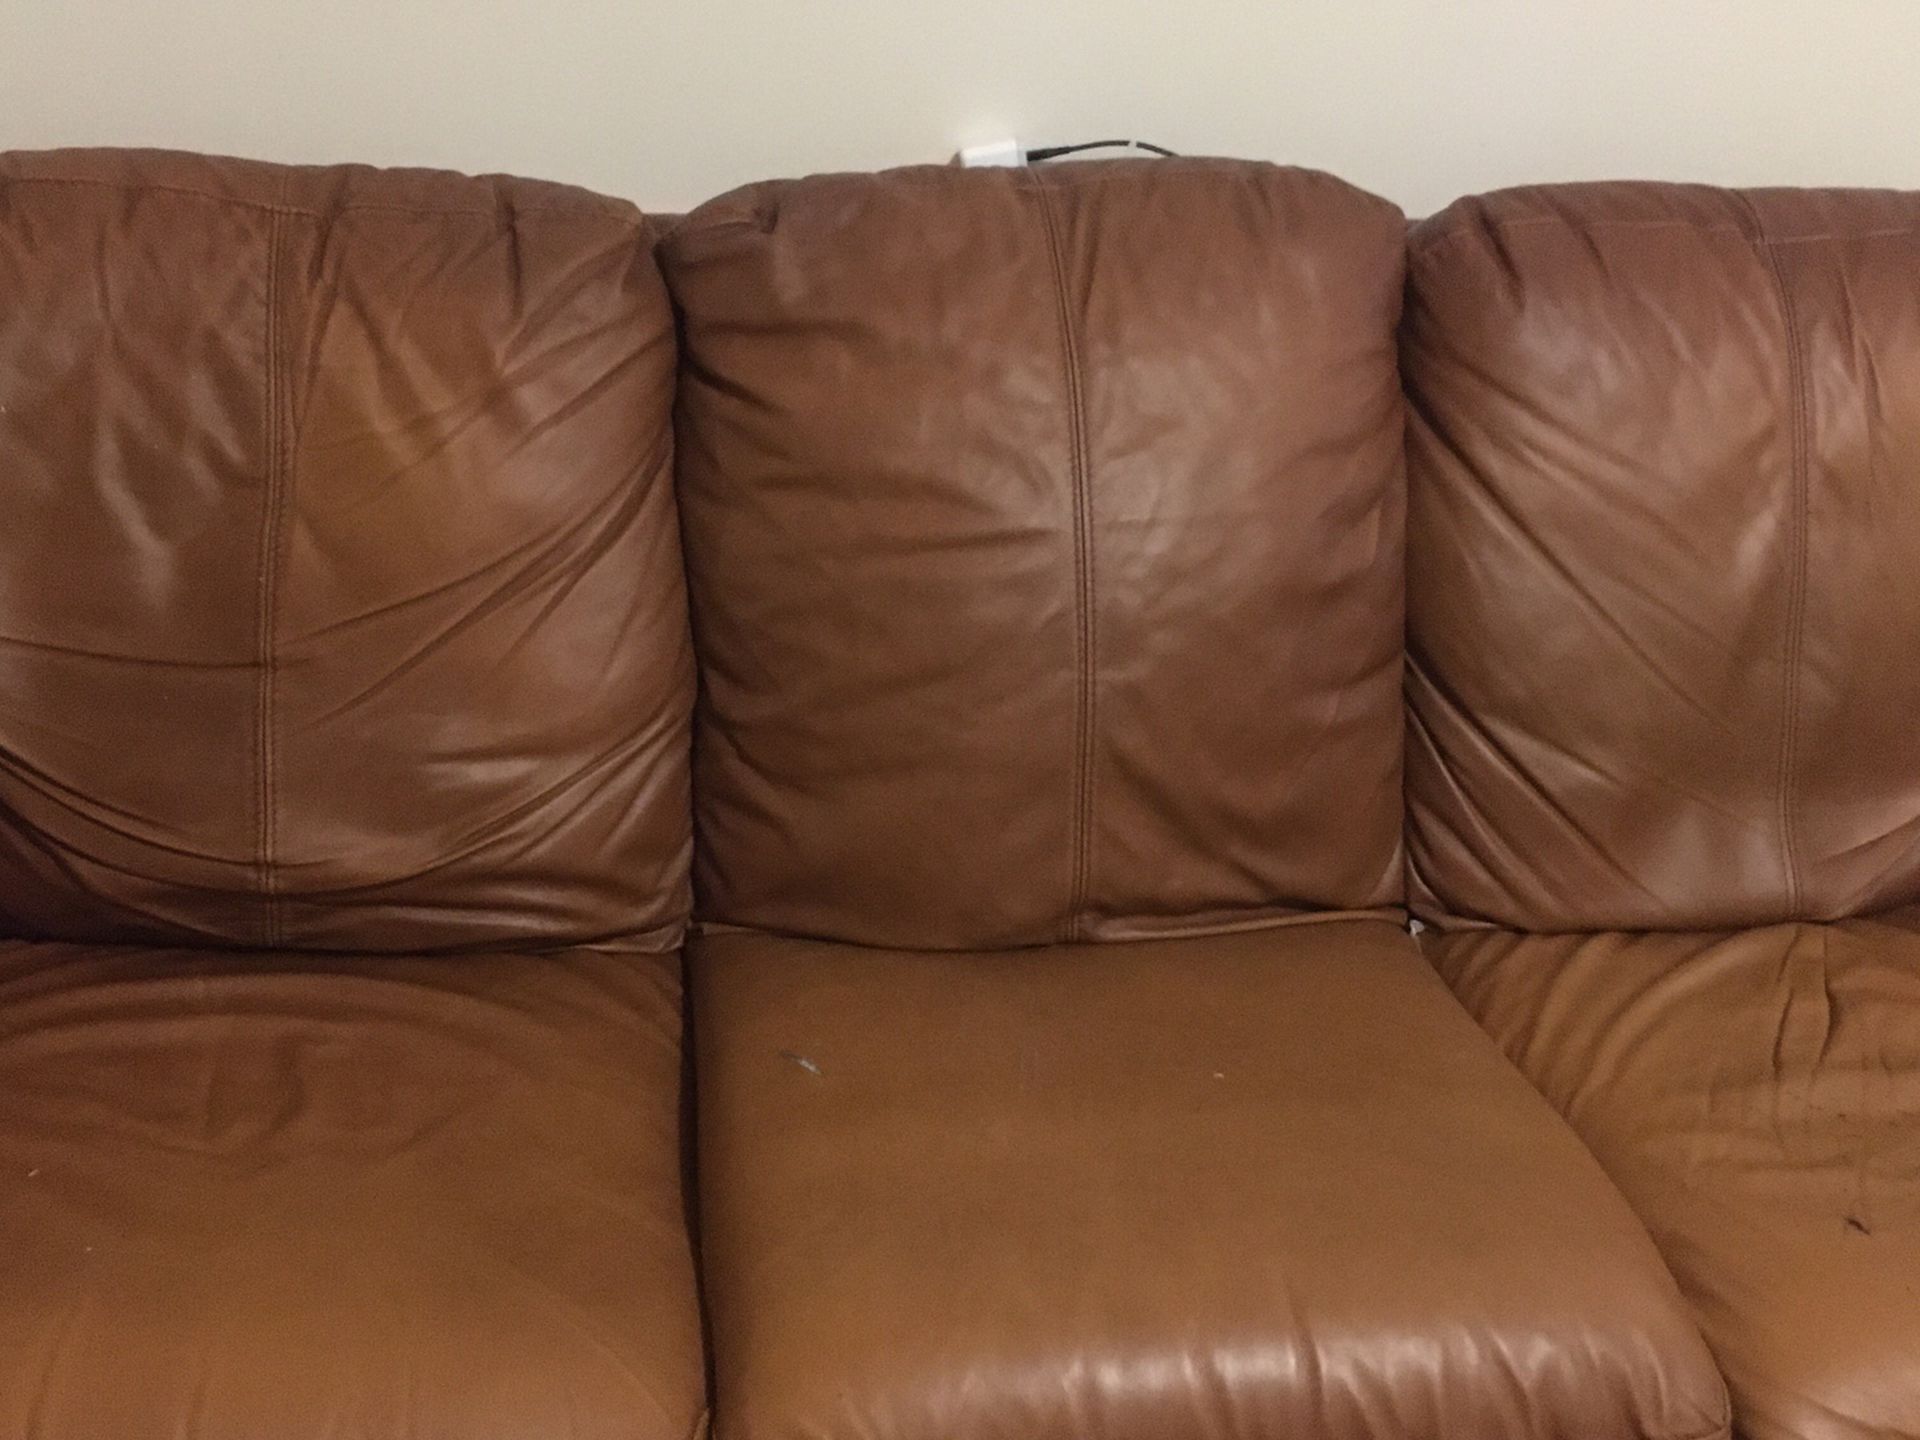 Leather Couch Free